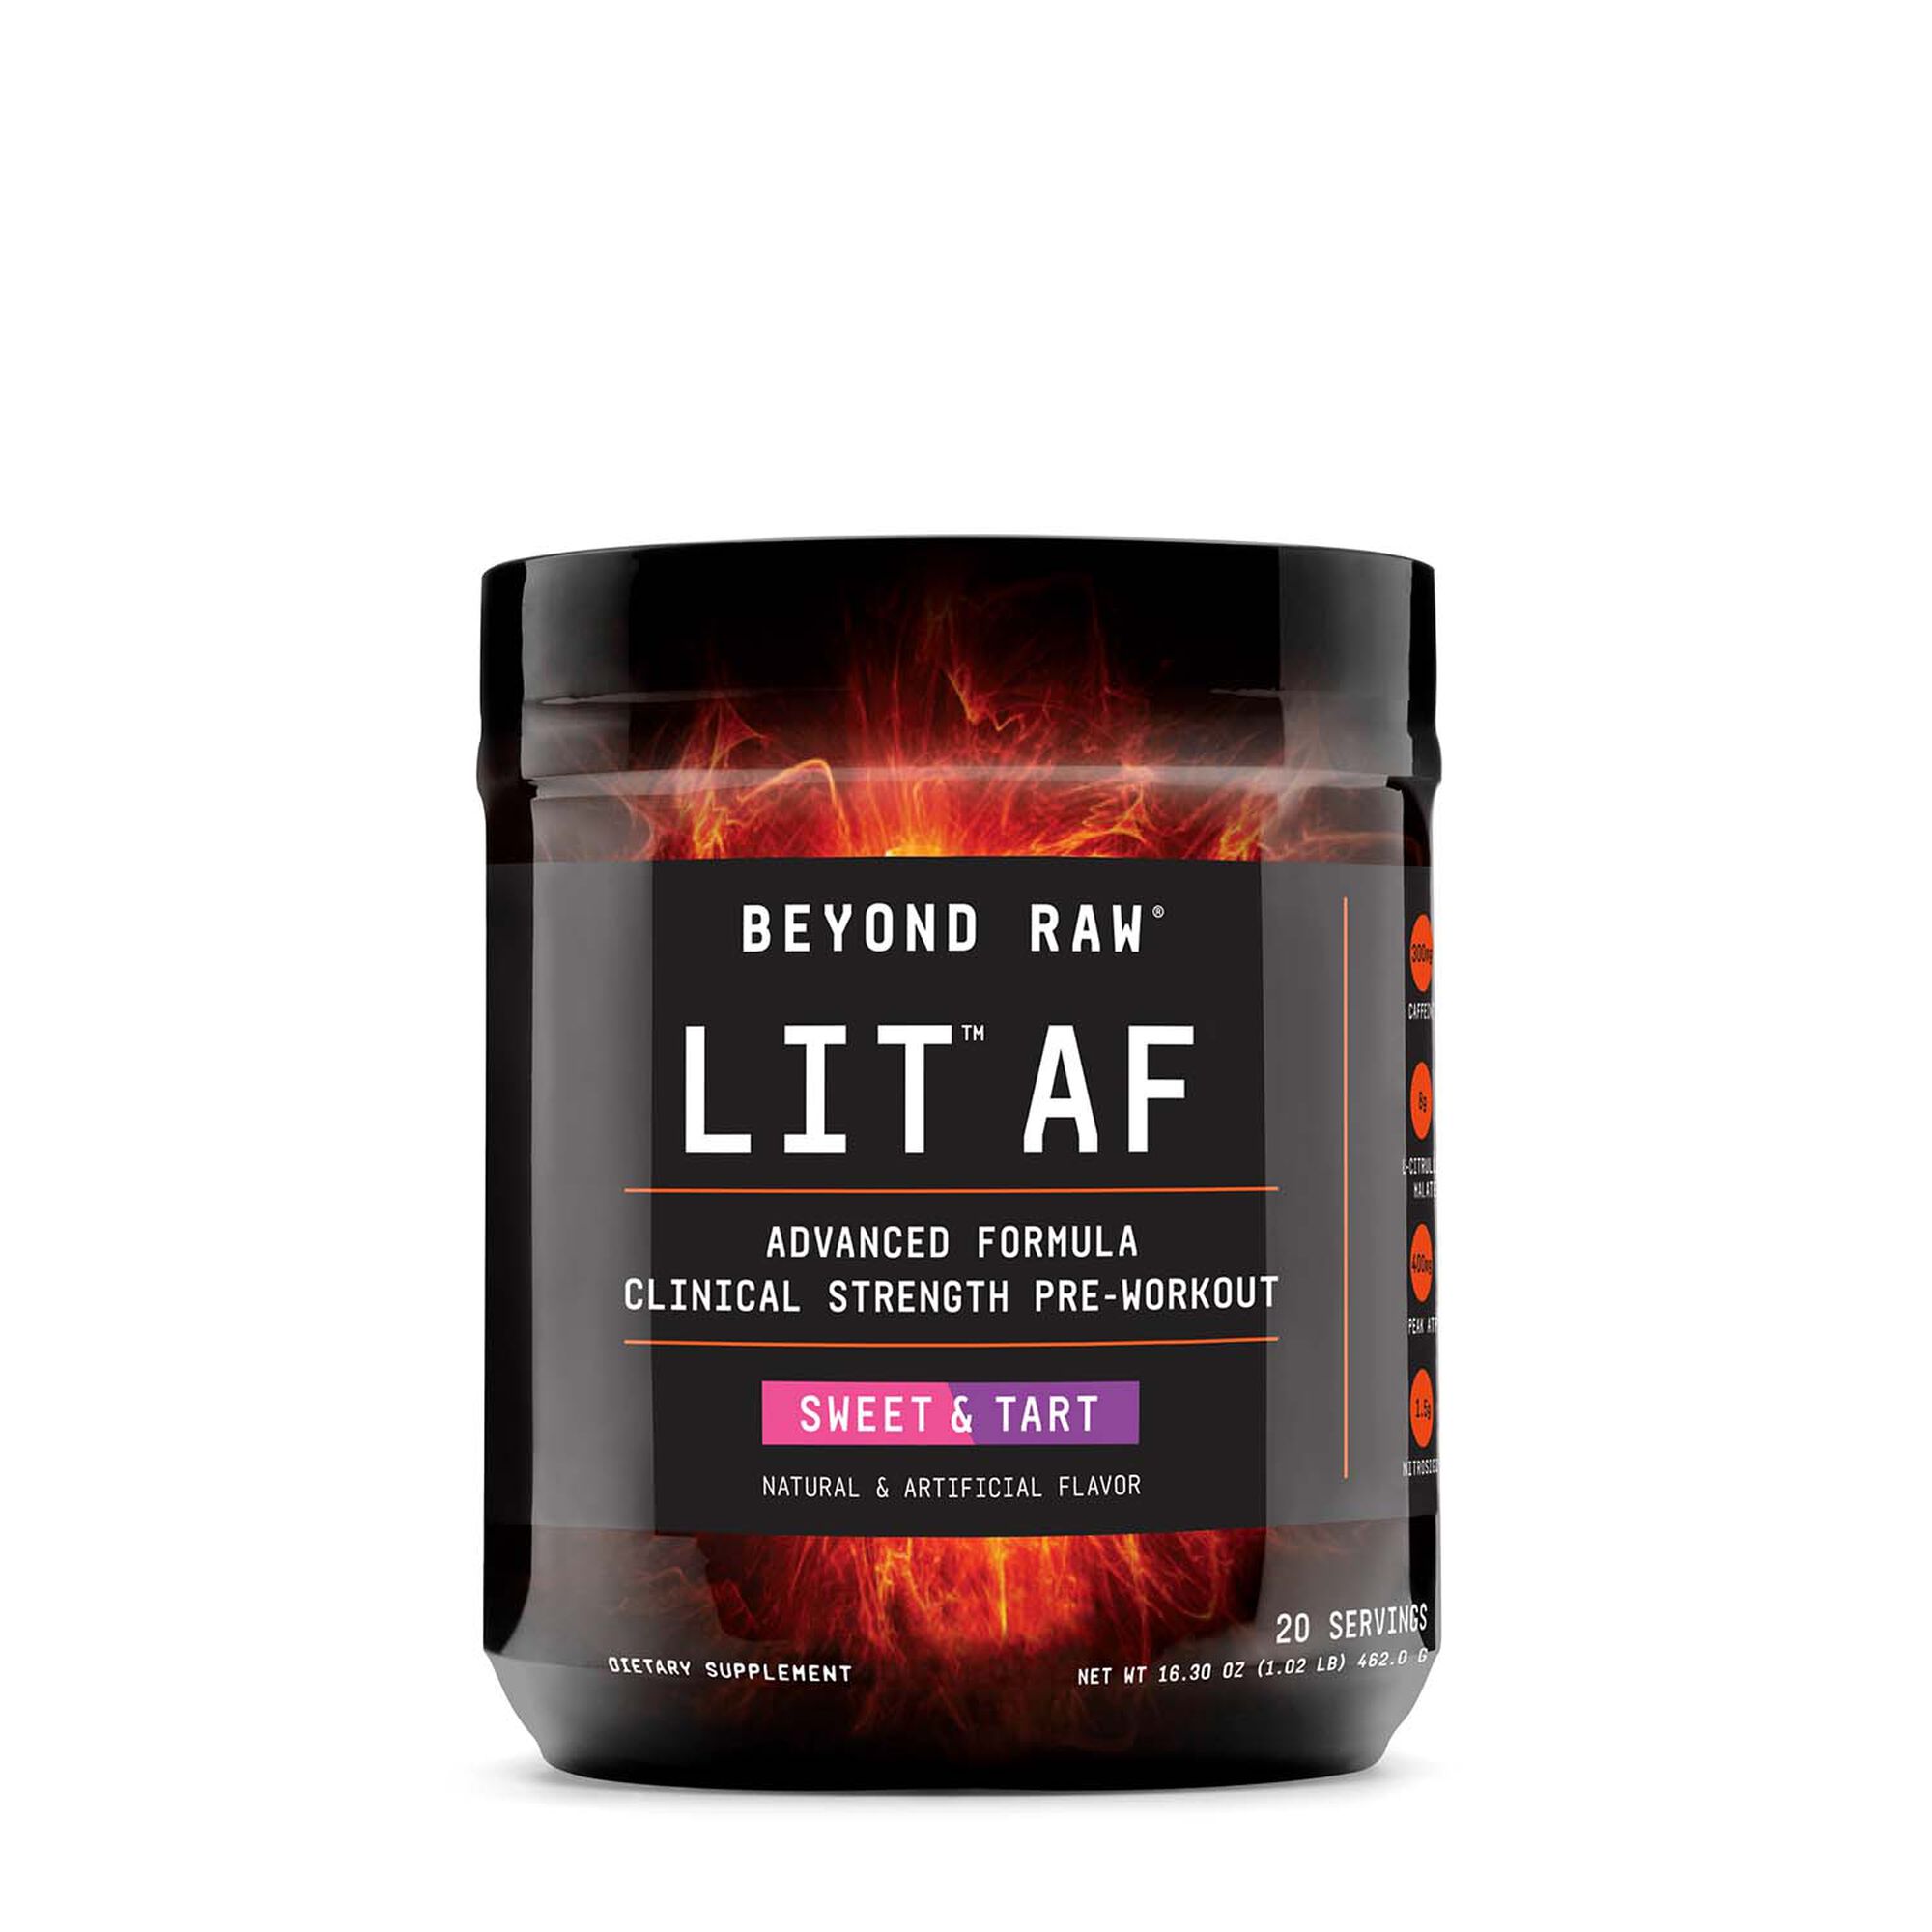 15 Minute Get Lit Pre Workout for Burn Fat fast